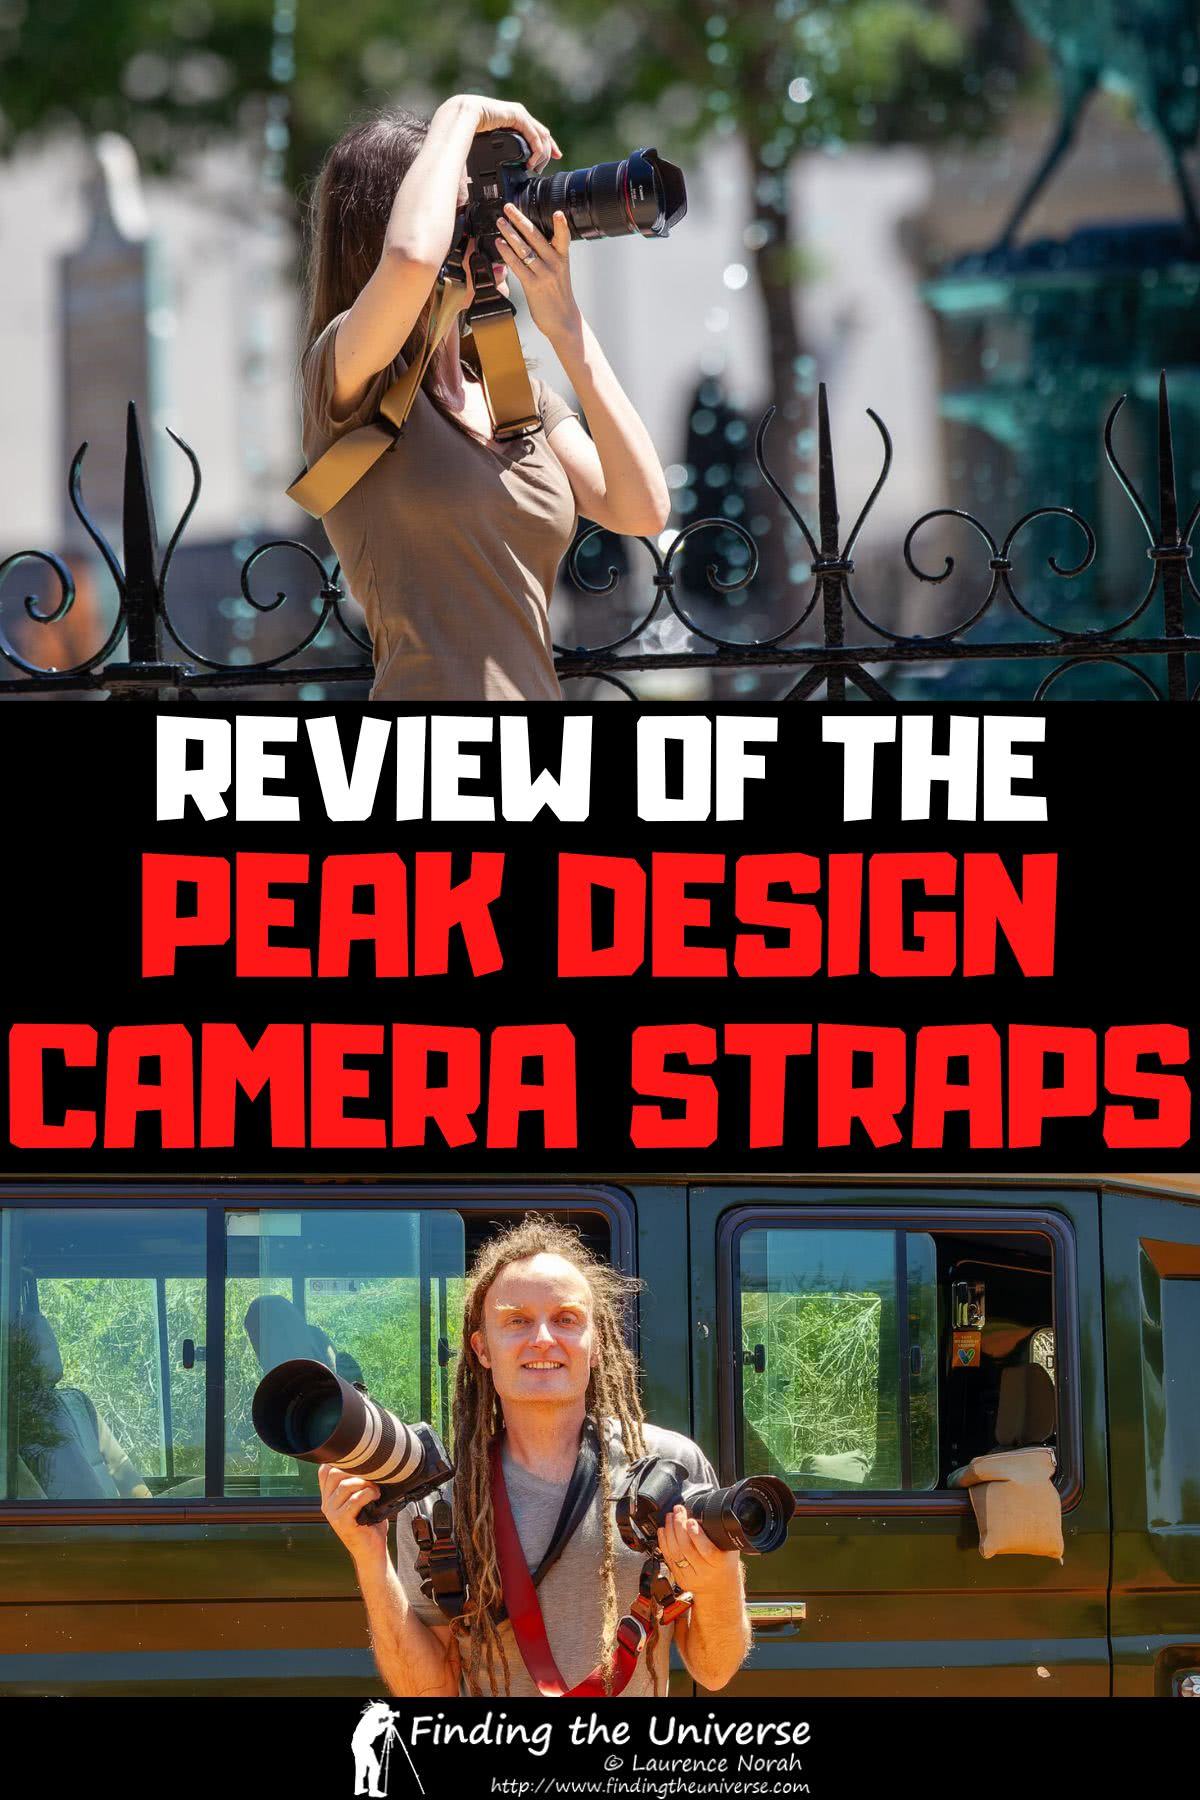 Detailed review of the Peak Design camera strap system